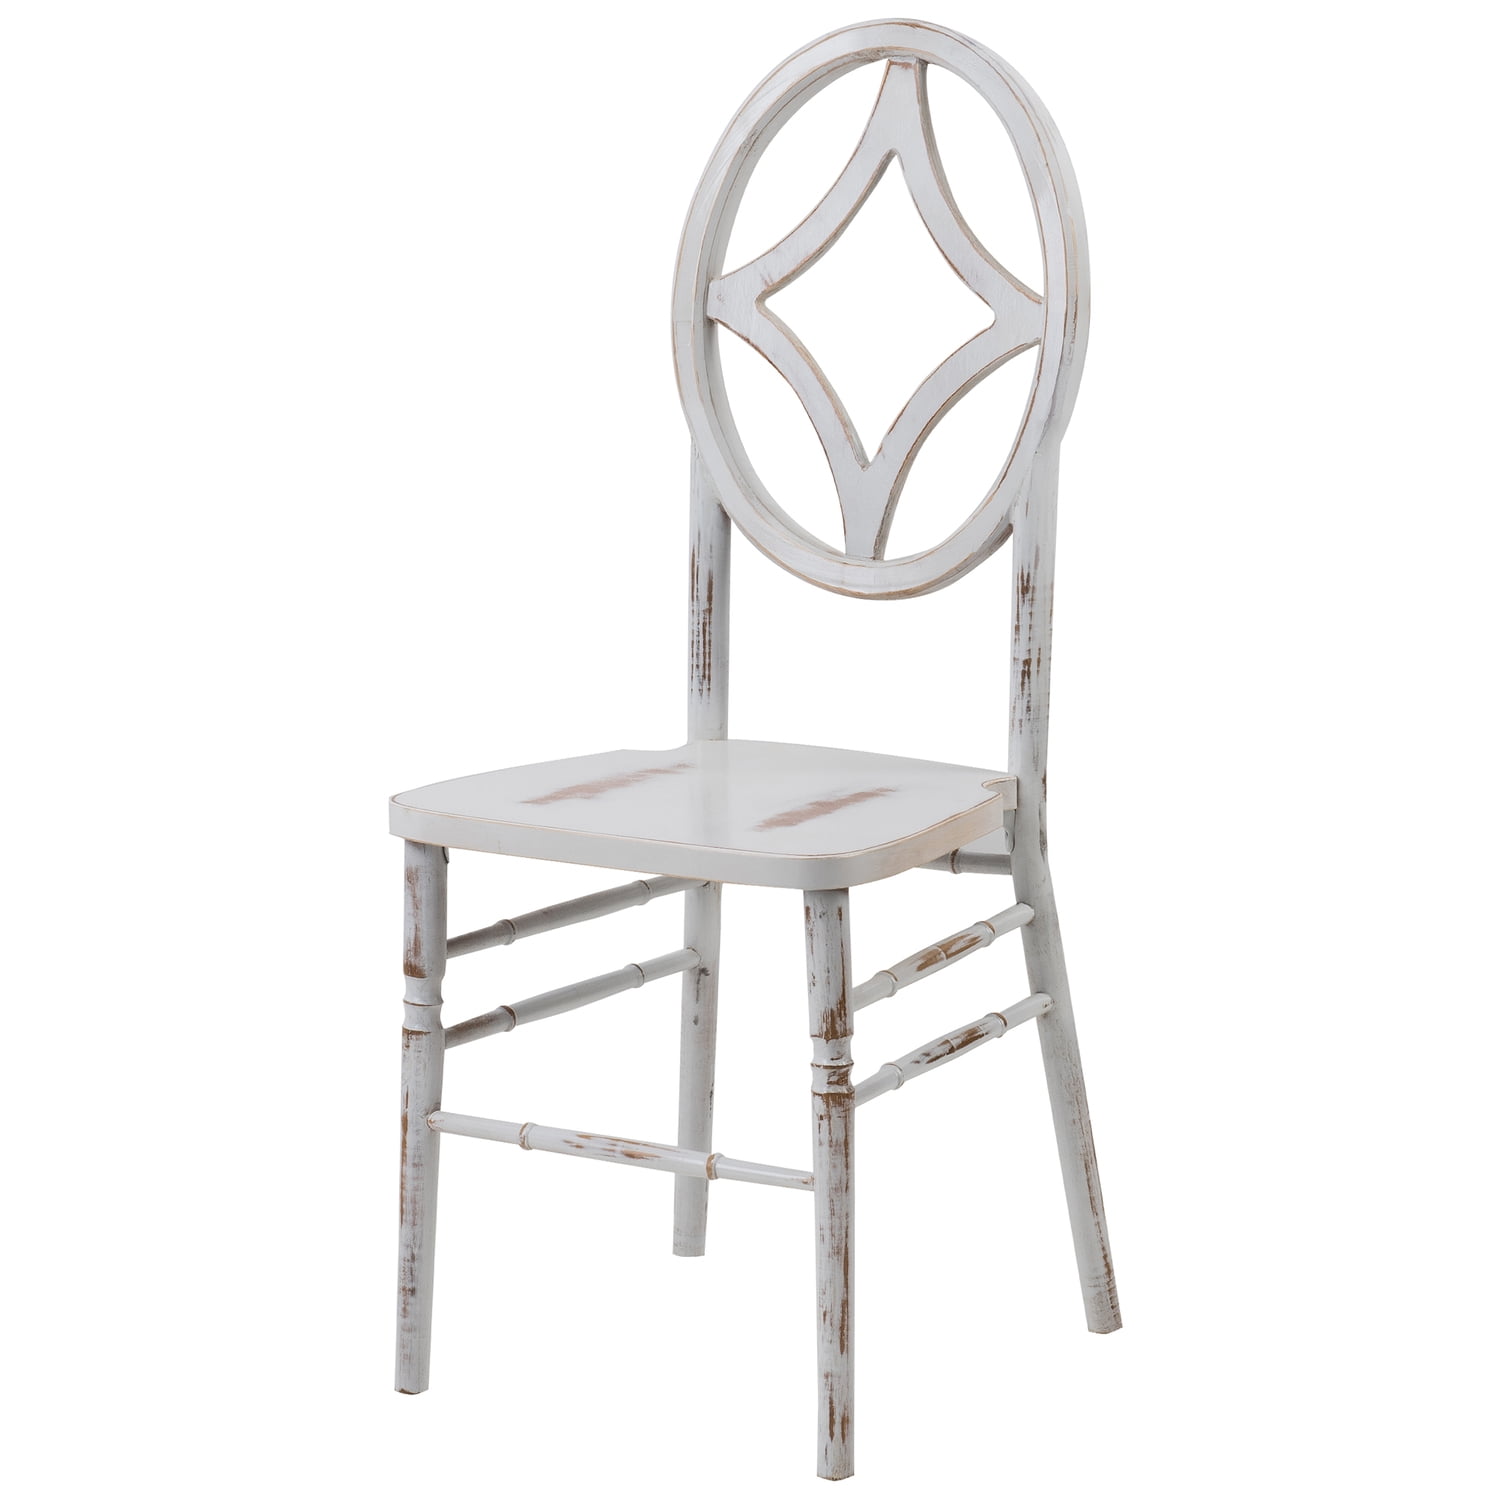 W-433-vr-diamond-lww-web2 Veronique Series Stackable Diamond Lime White Wash Wood Chair, Set Of 2 - 38.75 X 16 X 16 In.